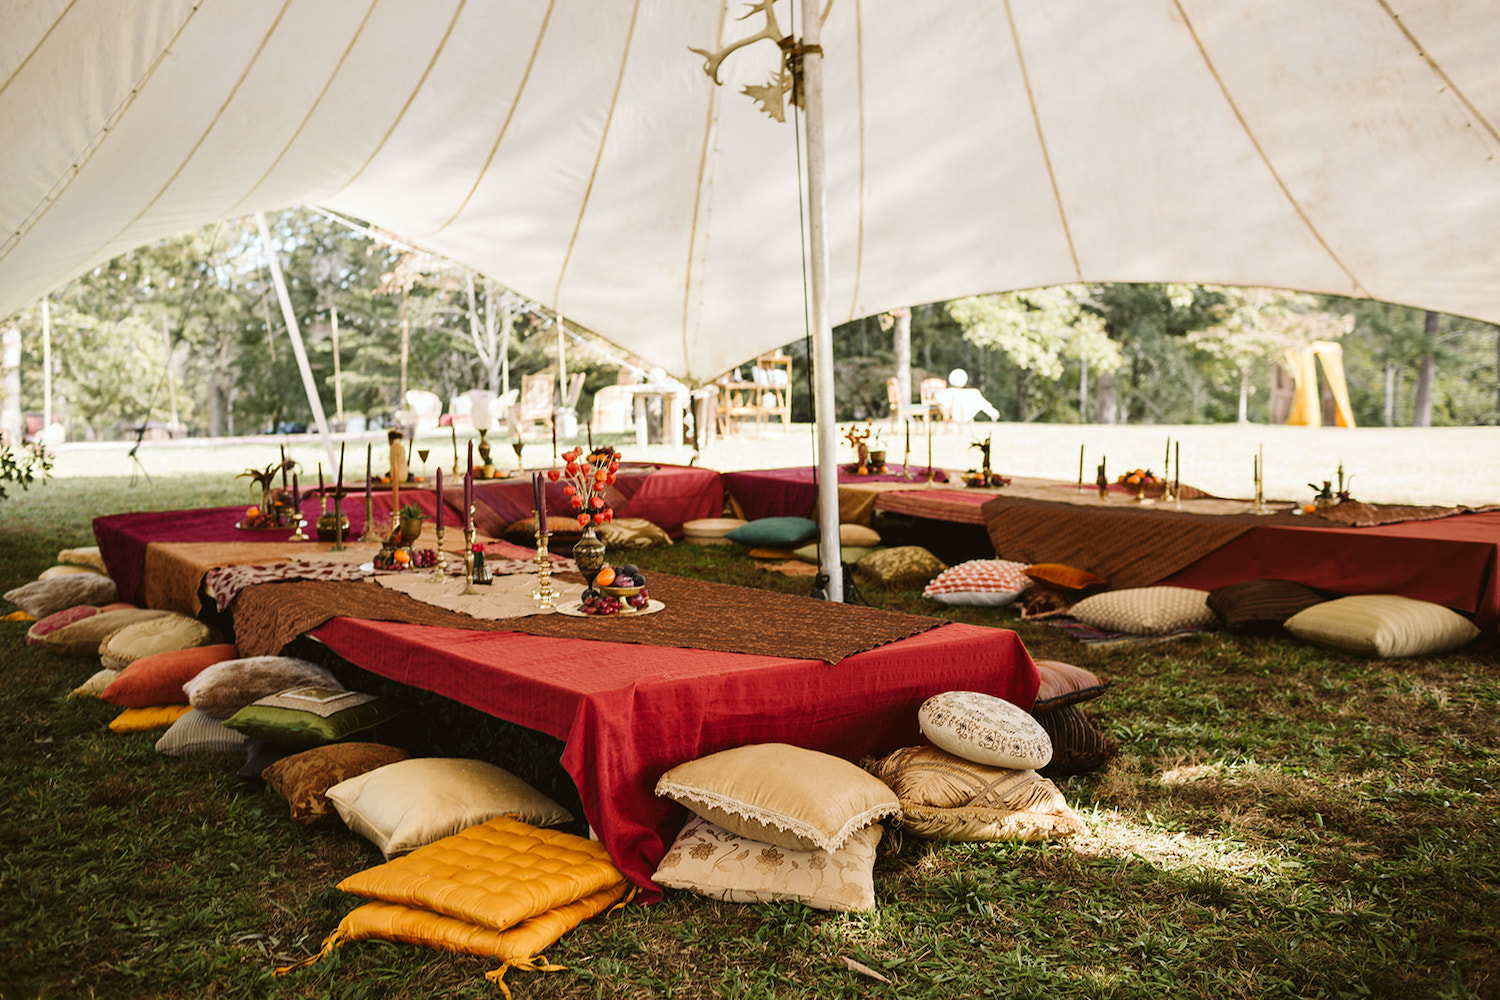 low tables covered with bright cloths and surrounded by colorful pillows sit under white tent at Bohemian festival wedding